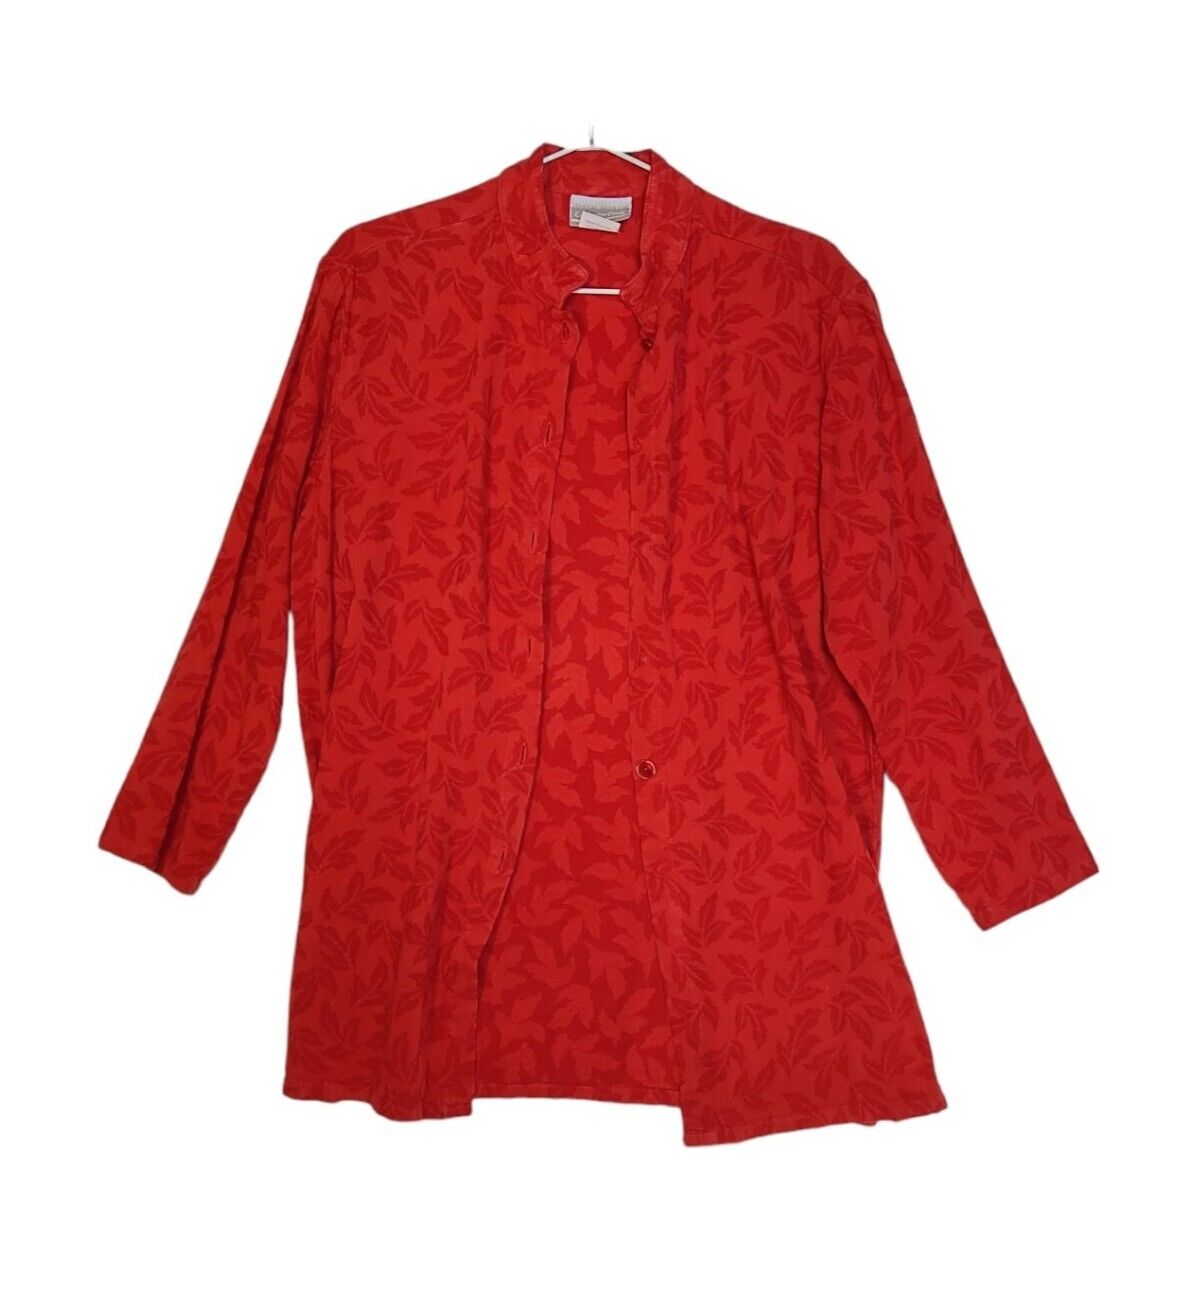 Coldwater Creek Red Tunic Shirt Red Leaf Print Sm… - image 2